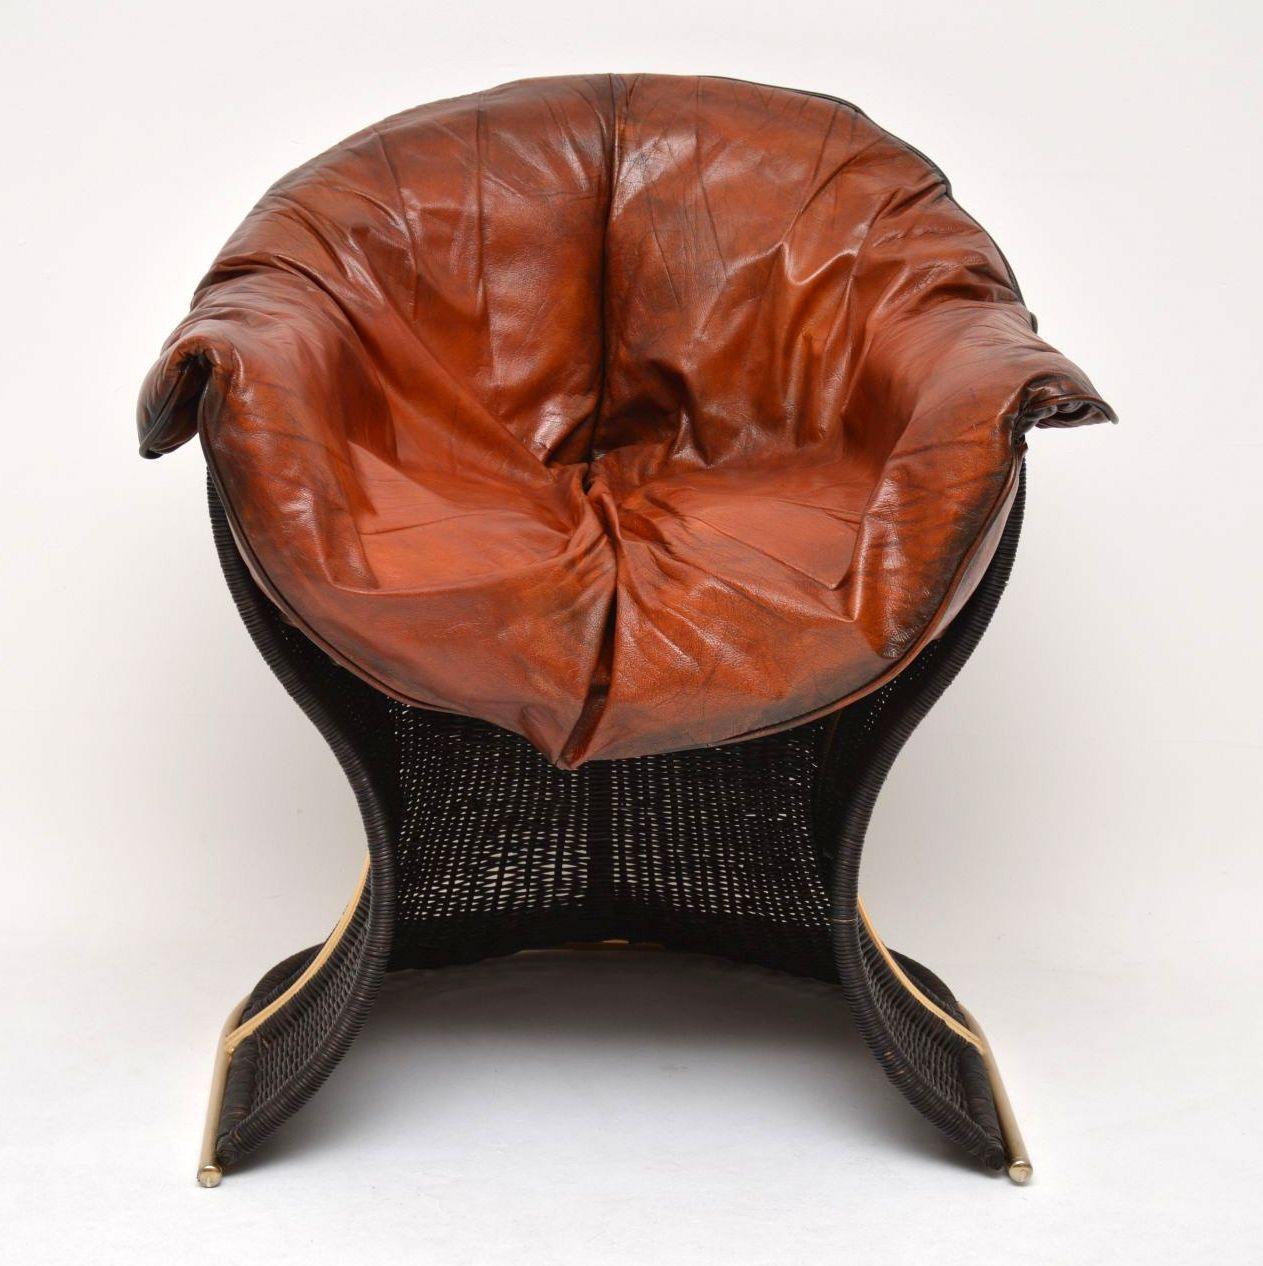 A very rare and unusually designed chair by Pieff of Worcester, this is called the Venus chair. It has an extremely well made wicker and brass frame, and removable leather cushions. The condition is excellent for its age, we have had the leather